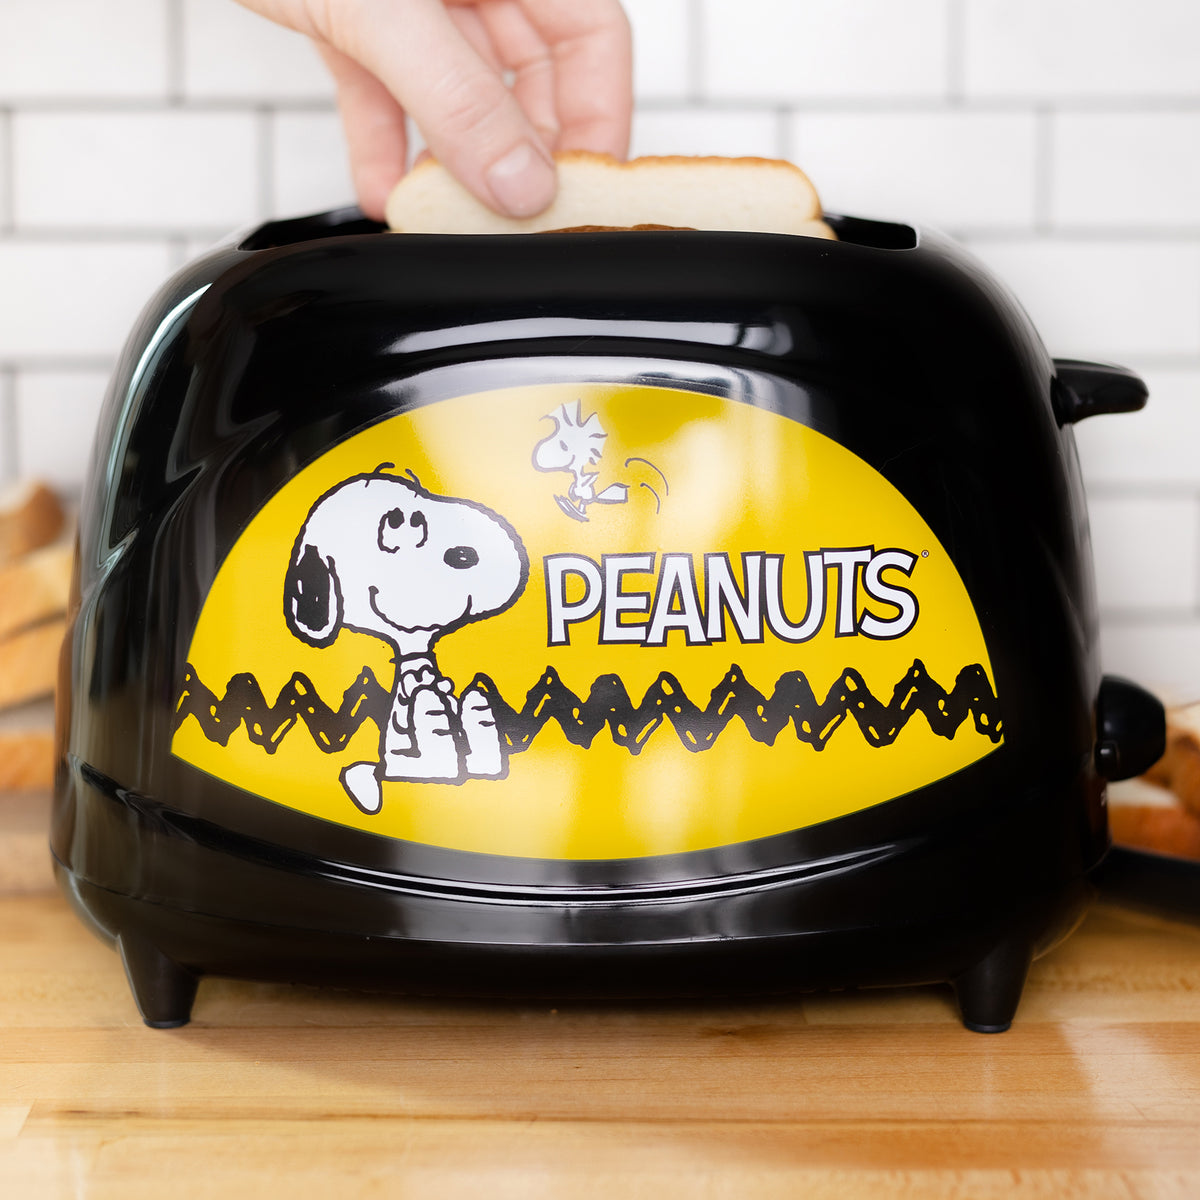 Snoopy & Woodstock Grilled Cheese Maker